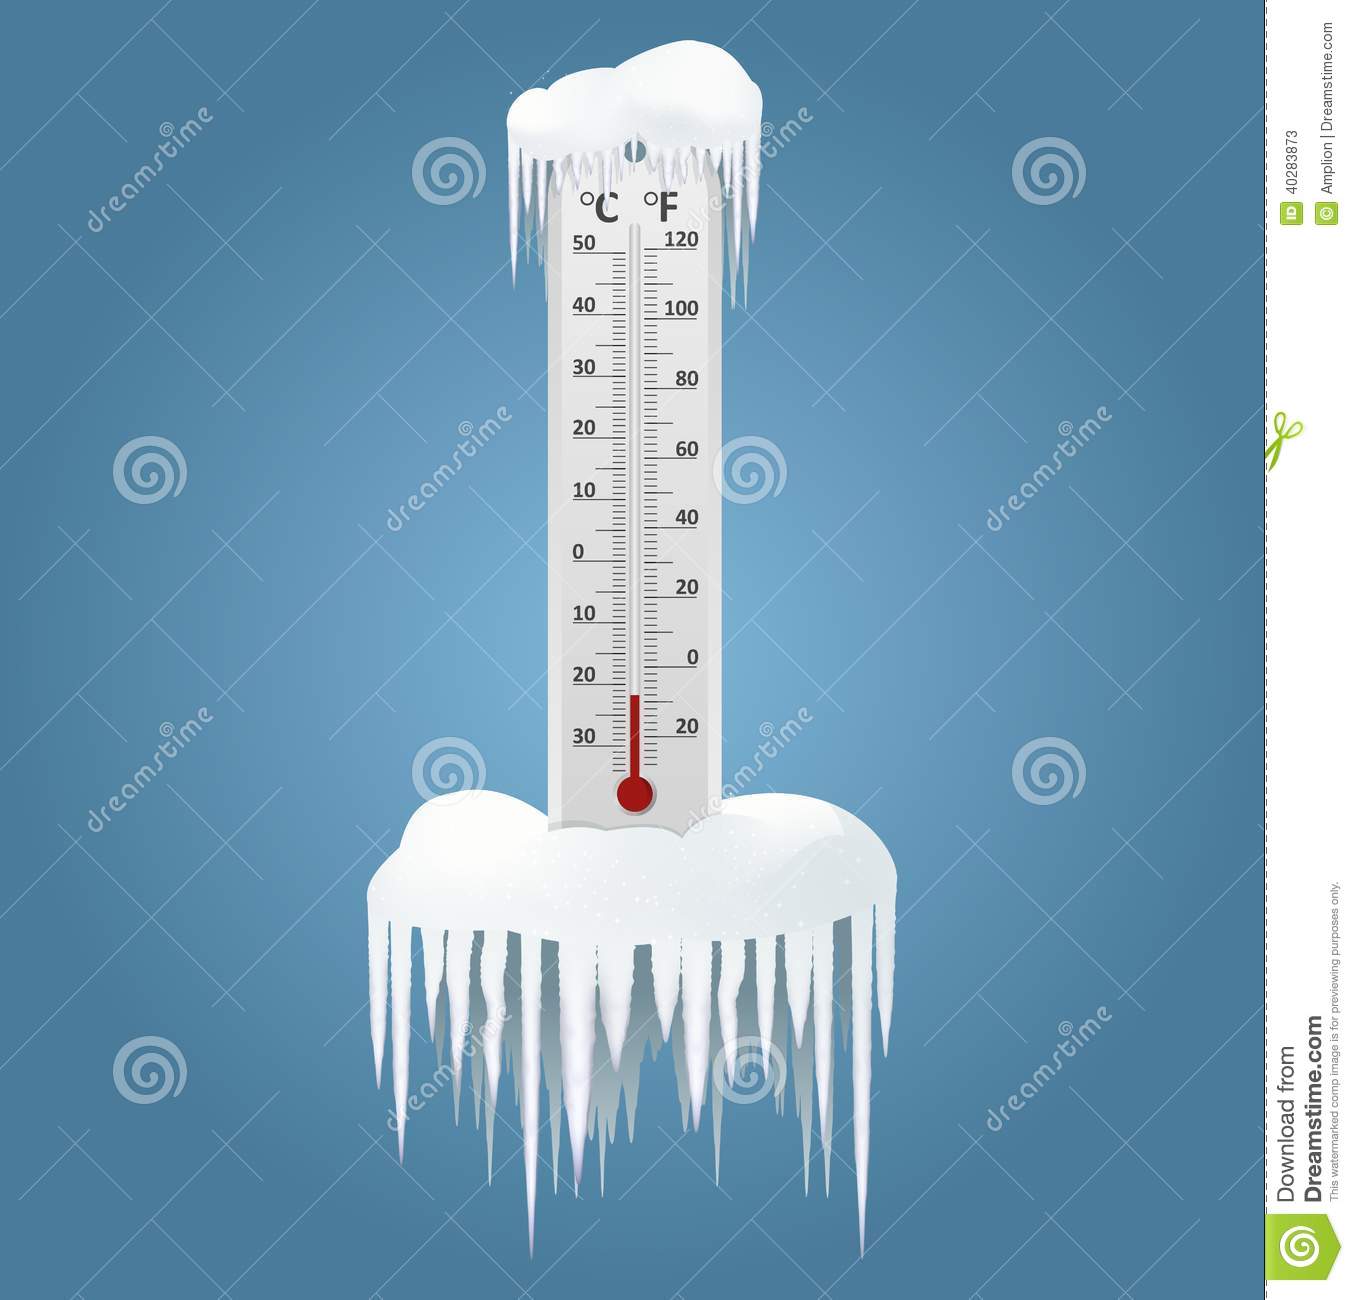 Frozen Thermometer Clip Art Frozen Thermometer Stock